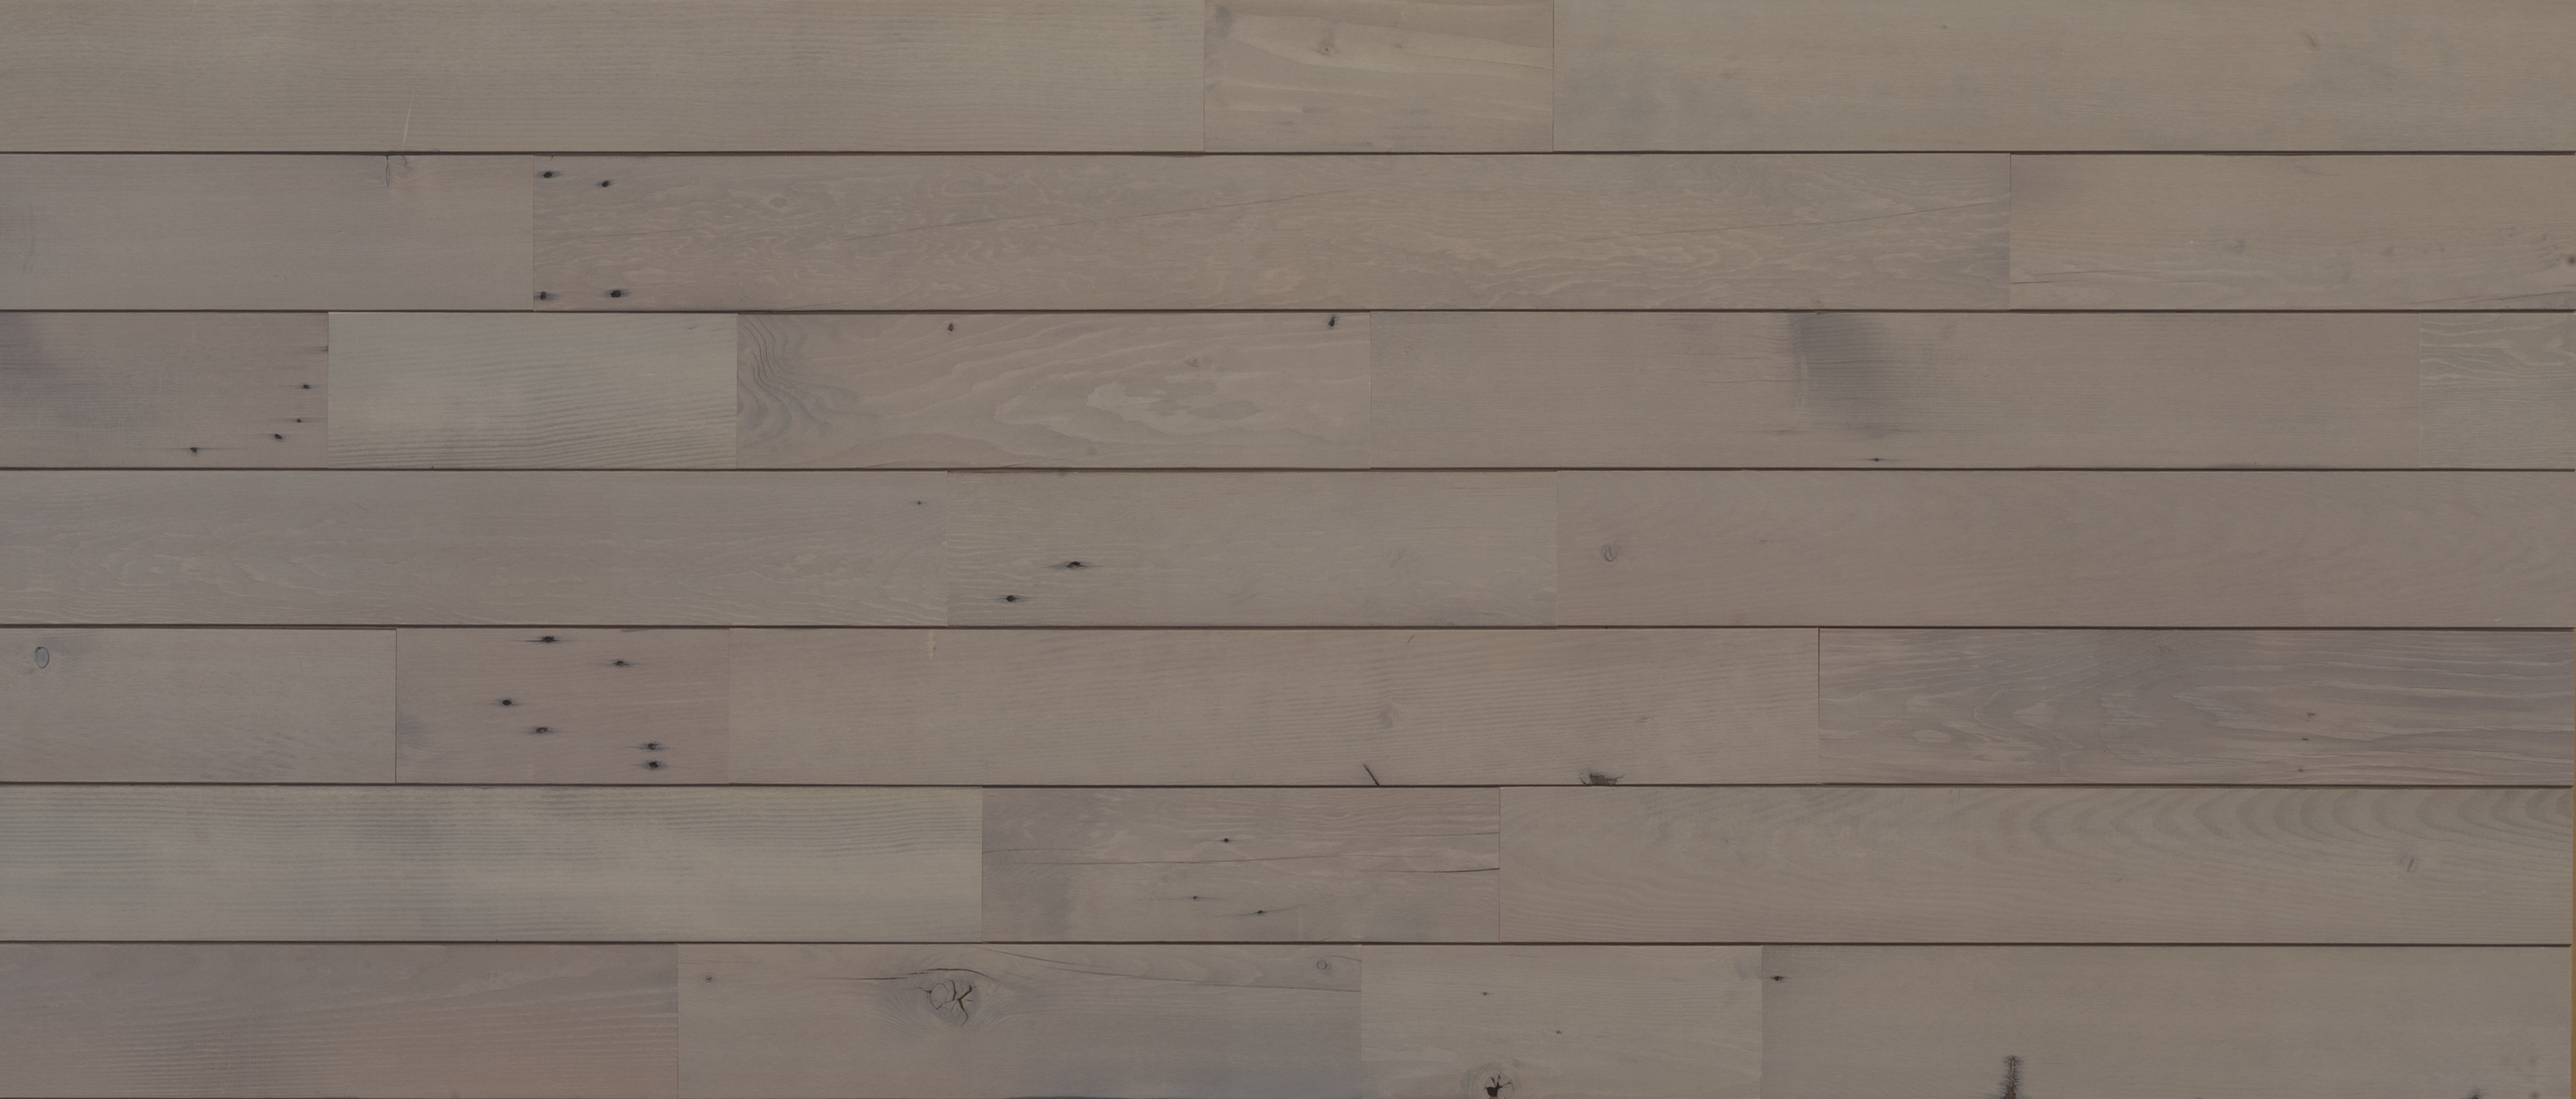 Stikwood Reclaimed Rustic Slate material explorer | real reclaimed douglas fir peel and stick wood wall and ceiling planks with gray, green, warm wood tone colors.